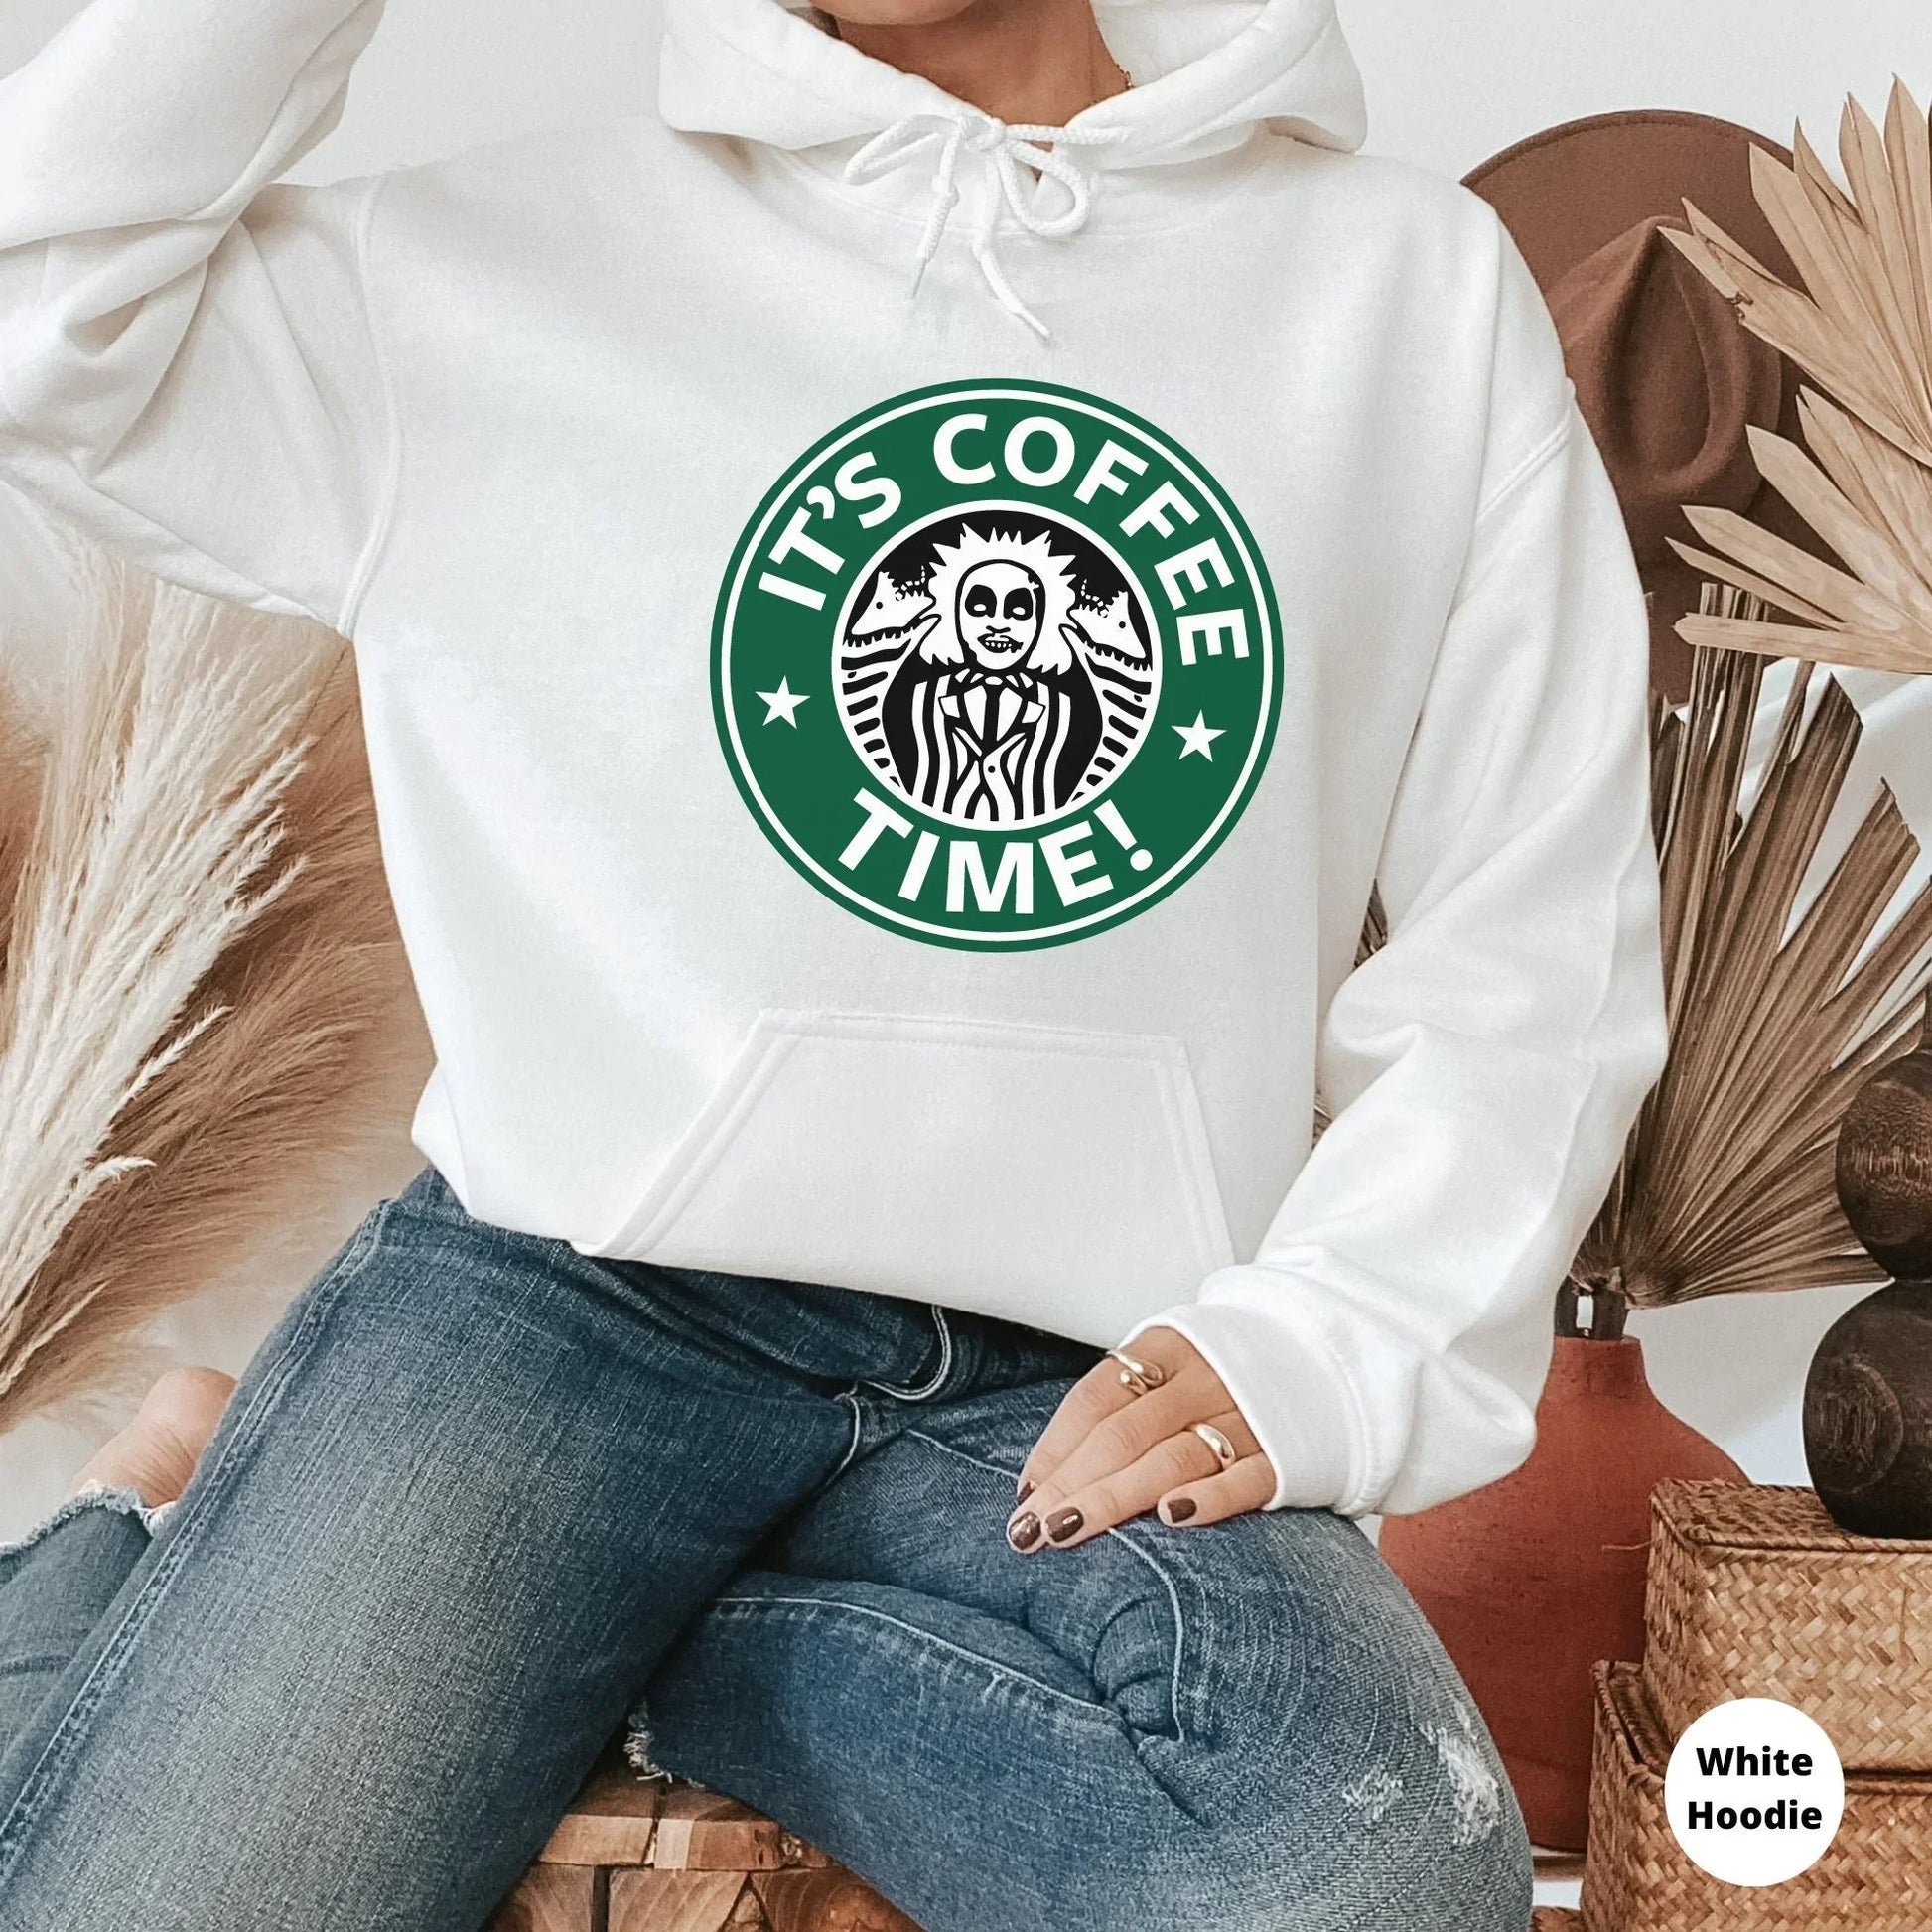 Horror Film Shirt, Halloween Friends T-Shirt, Its Coffee Time Scary Movie Hoodie, Coffee Themed Halloween Tshirt, Horror Movies Sweatshirt HMDesignStudioUS